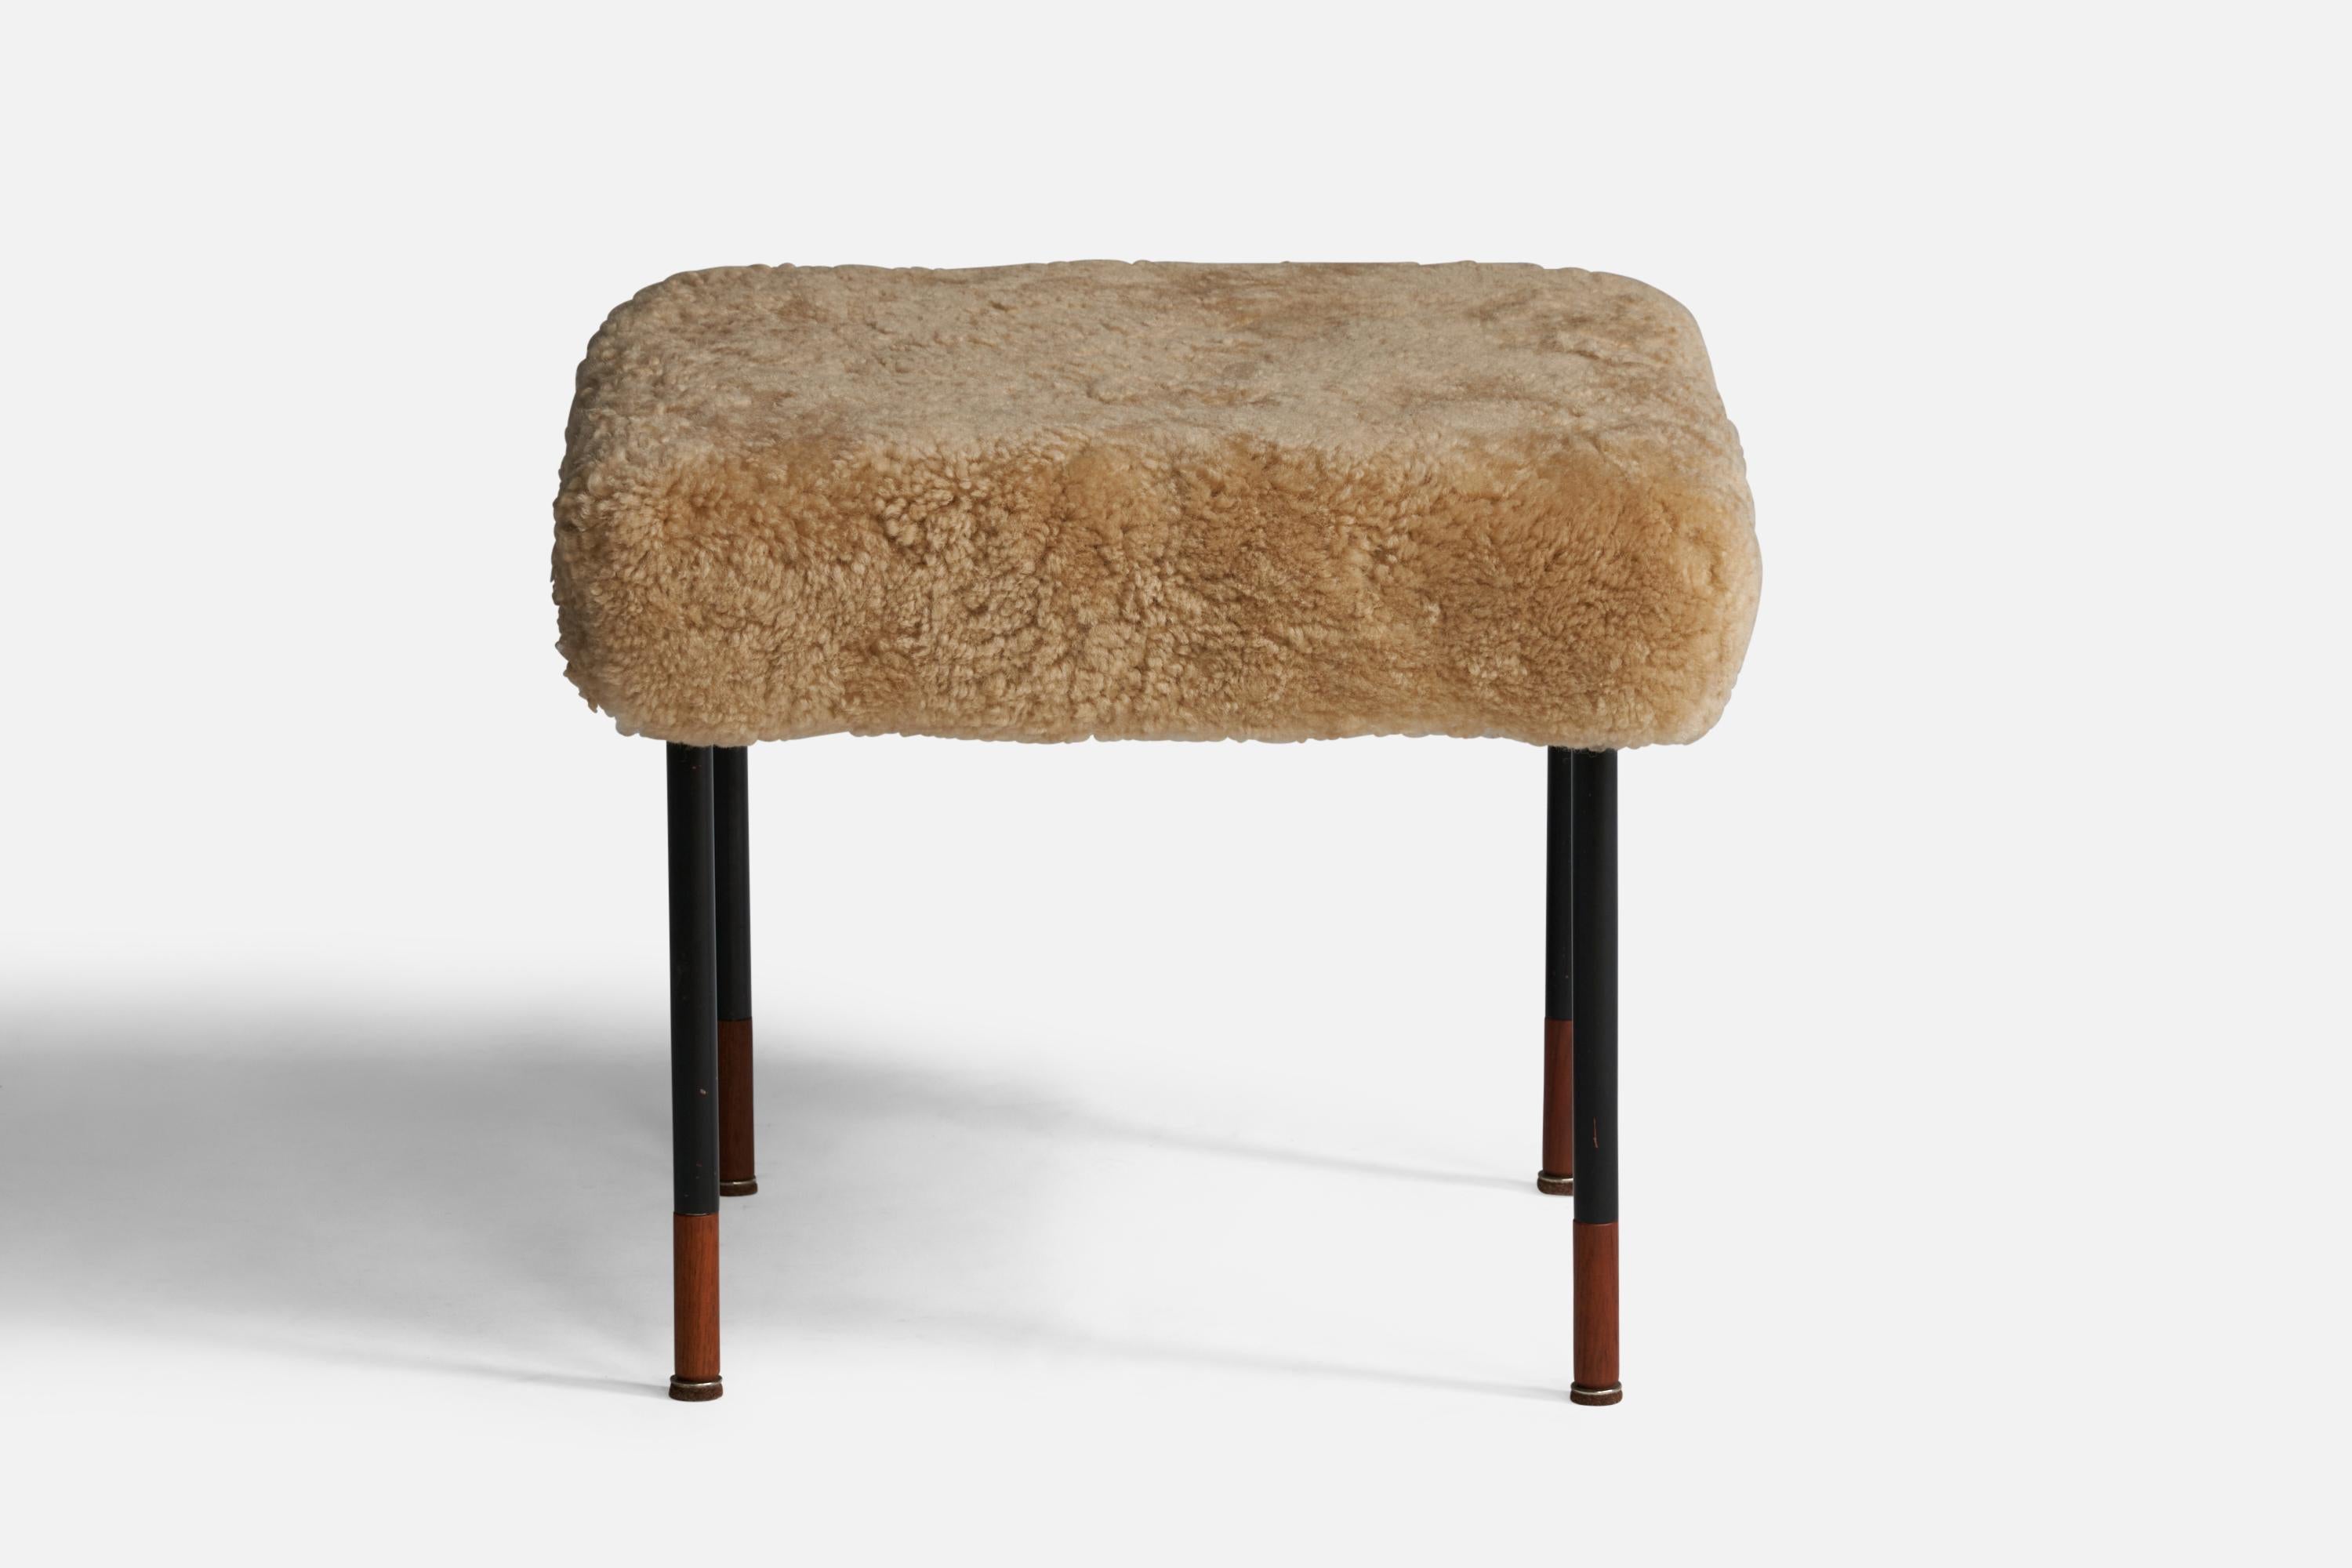 A beige shearling, black-lacquered metal and teak stool designed by Kurt Østervig and produced by Jason Møbler, Denmark, c. 1950s.

Seat height: 18”